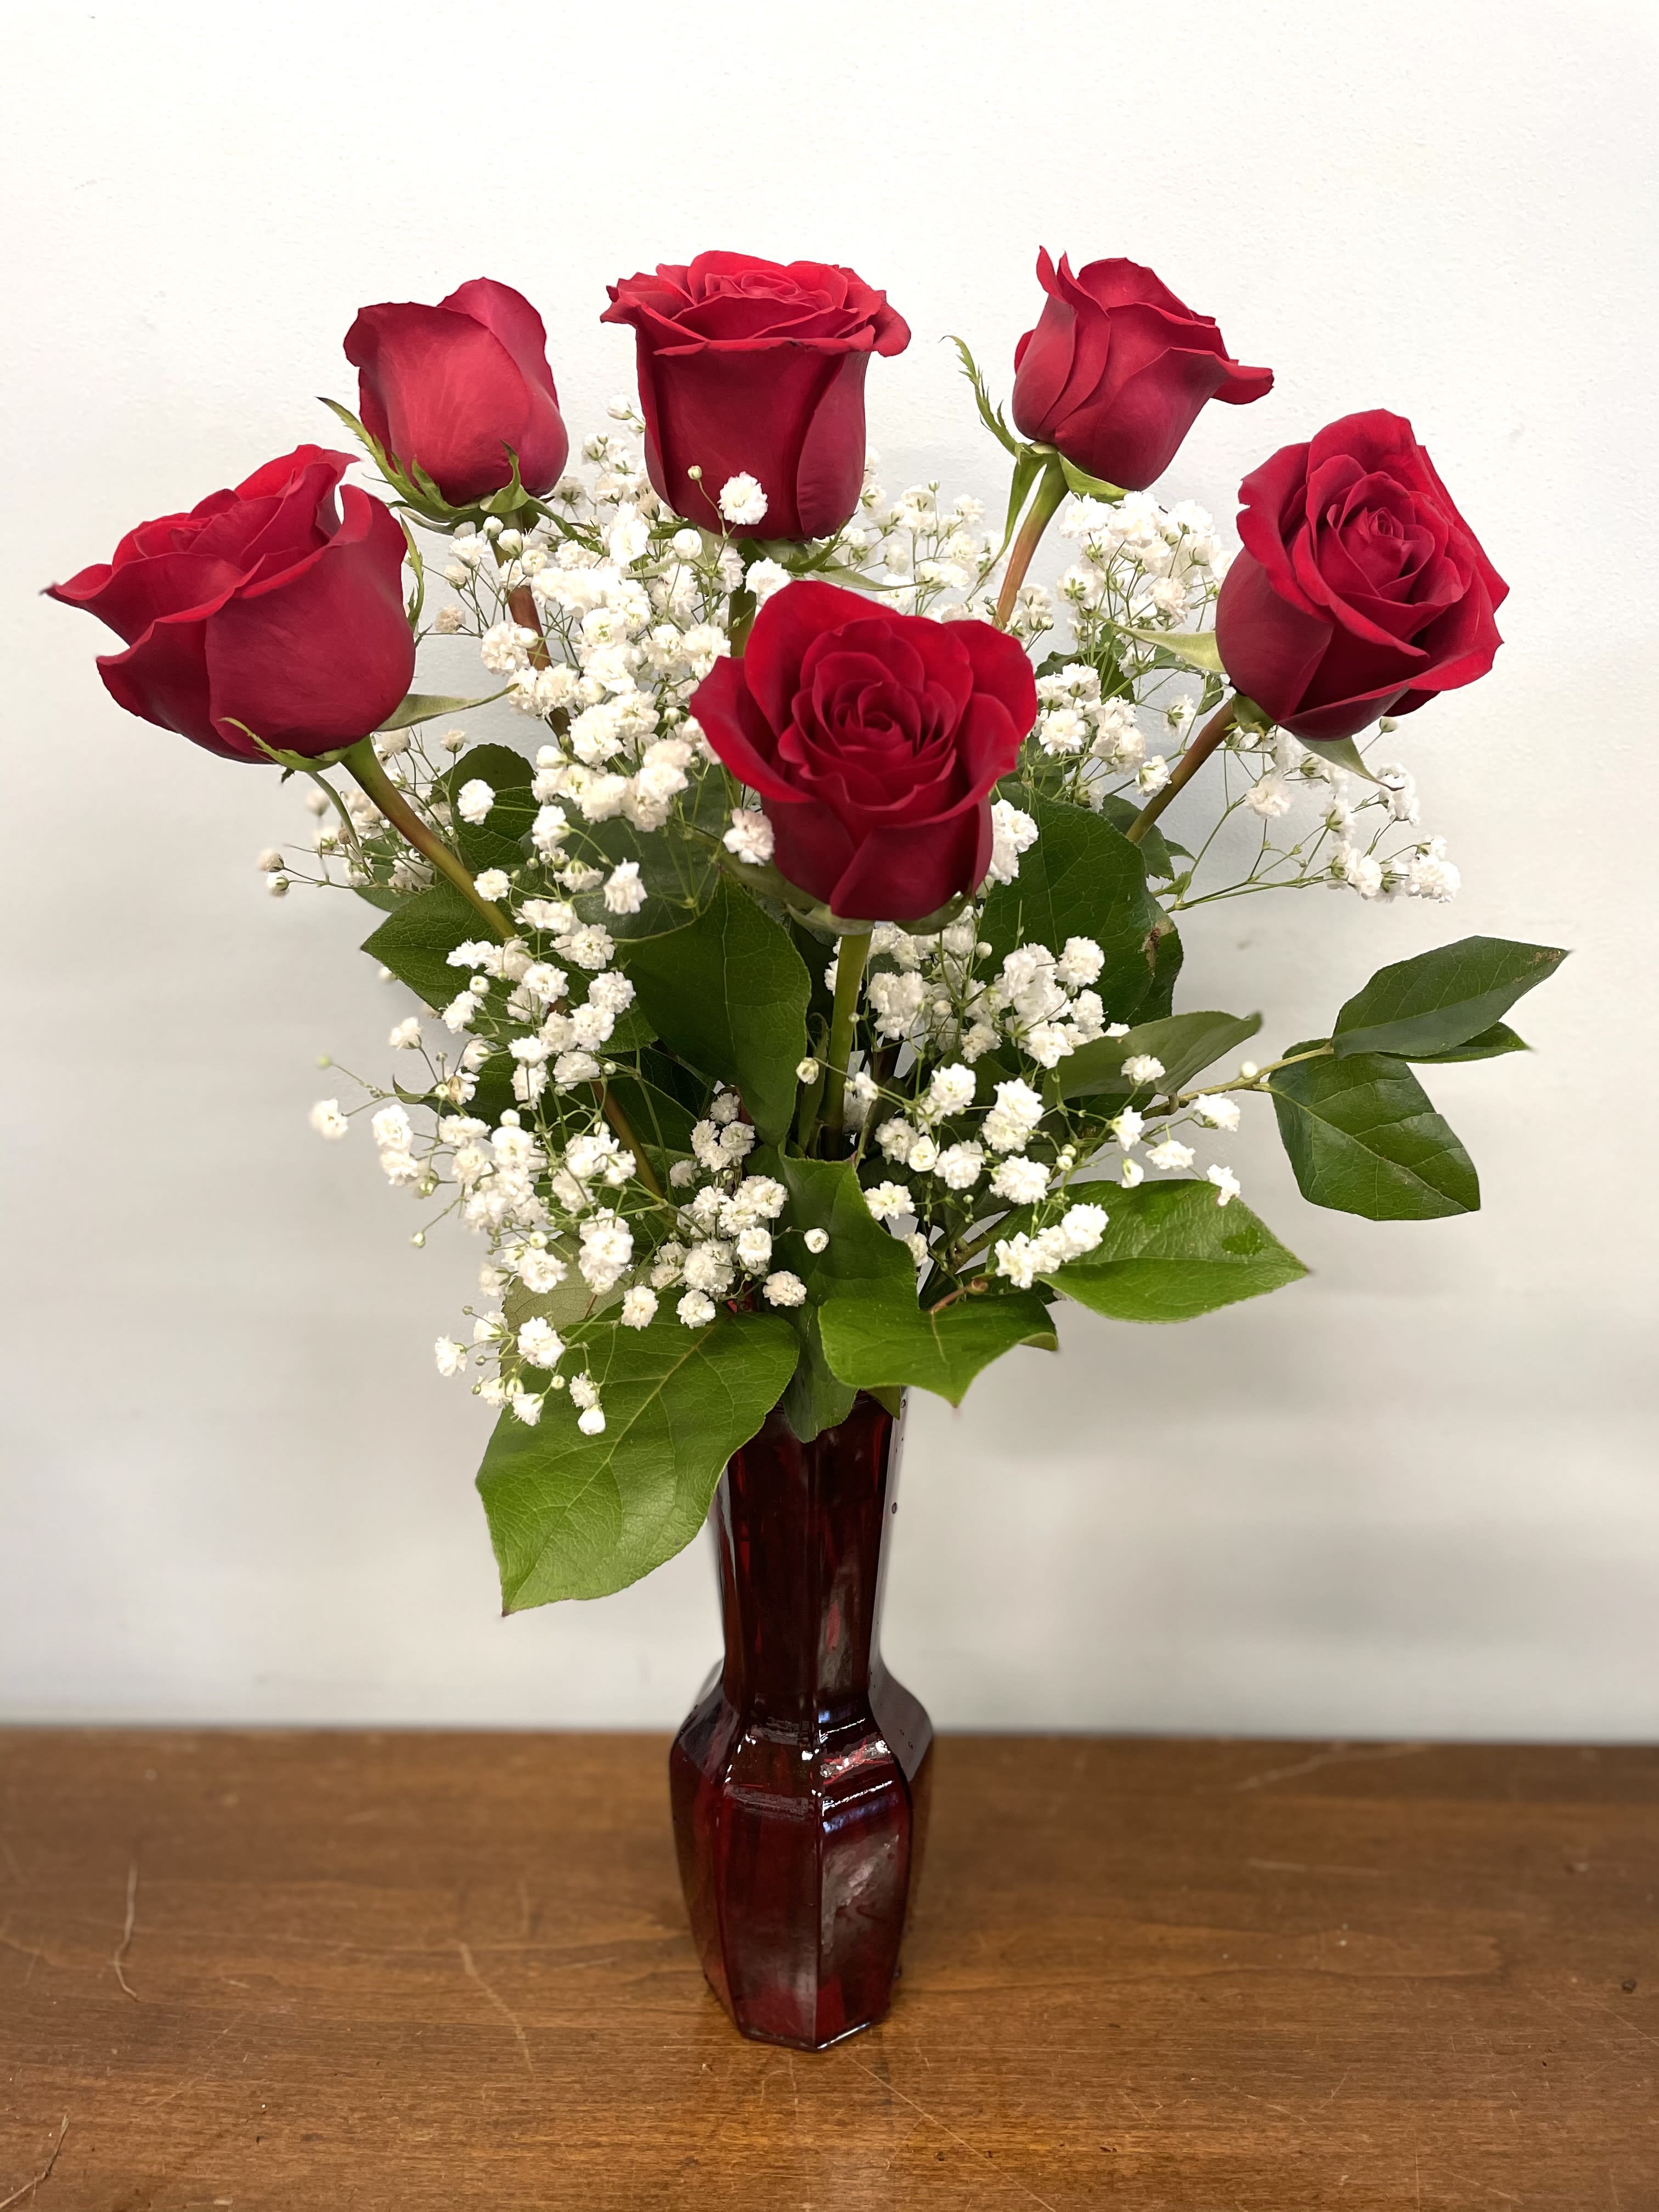 Half-Dozen Red Roses  - 6 red roses are arranged in a red glass vase with babies breath...A Classic and simple way to share your love! 